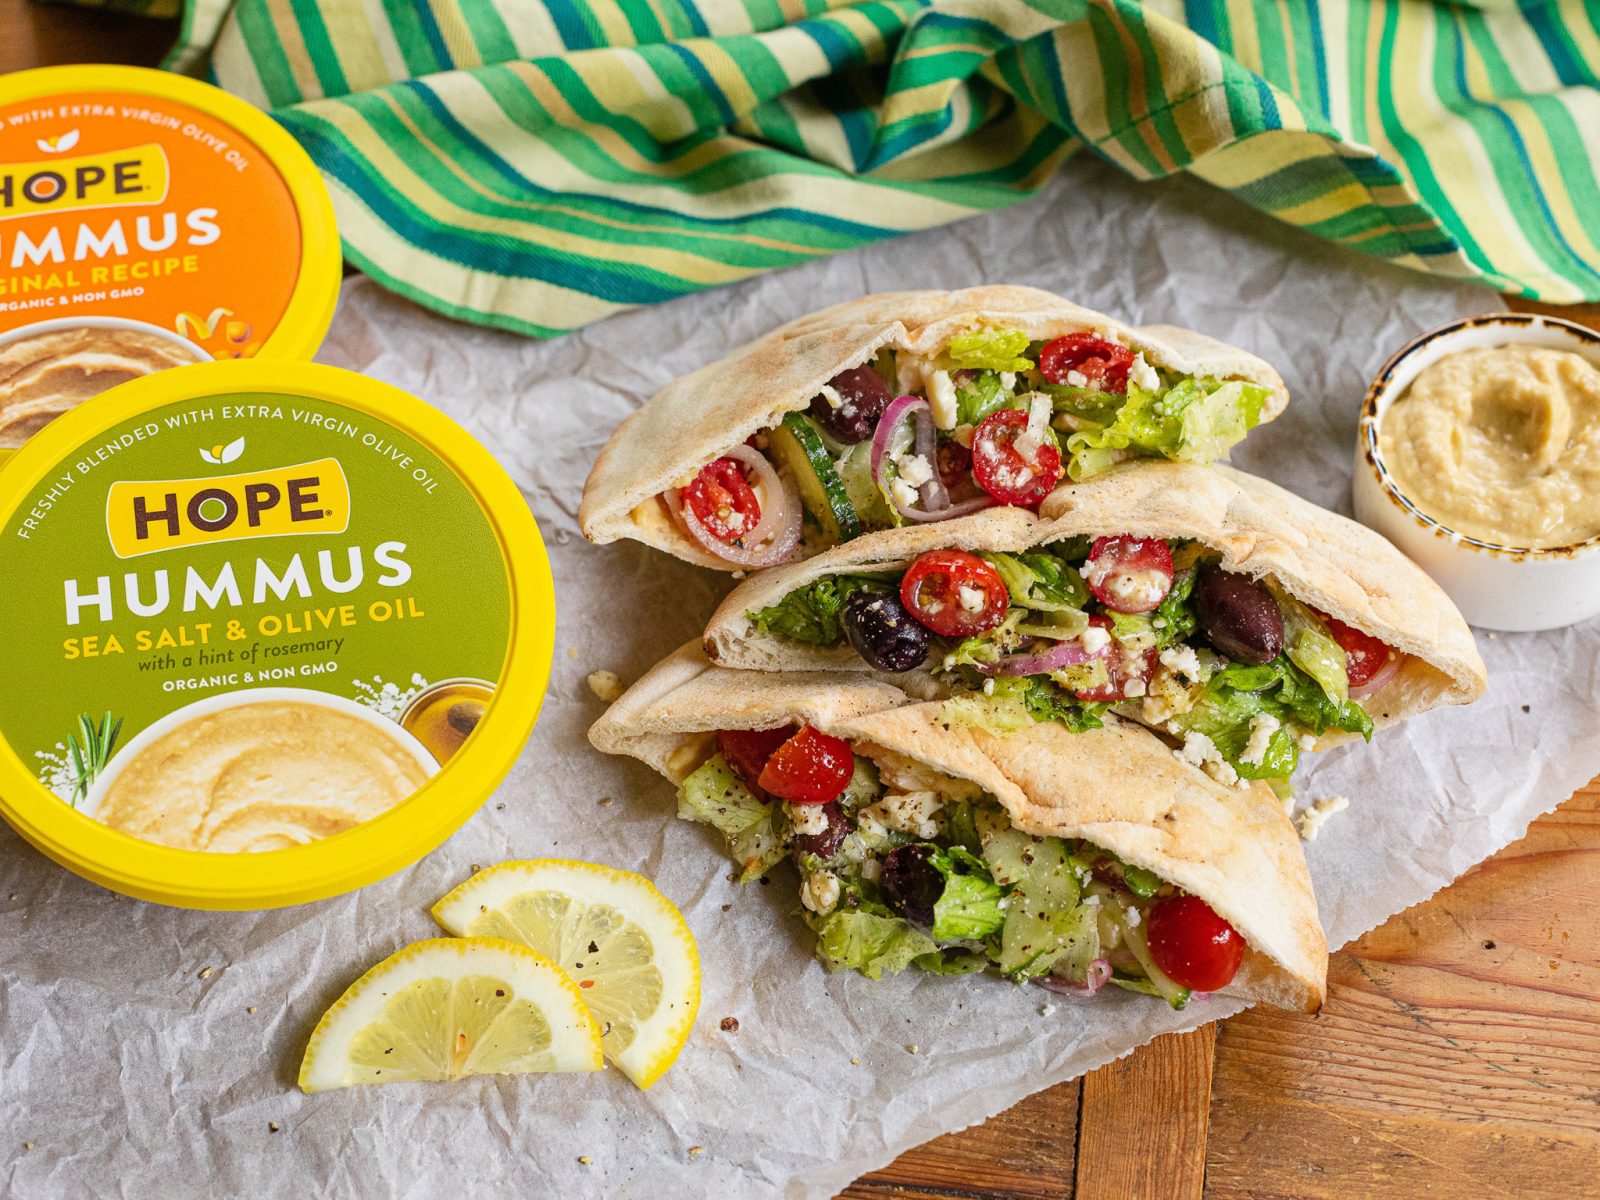 Try HOPE Hummus As A Dressing On Your Favorite Salad – Save NOW At Publix